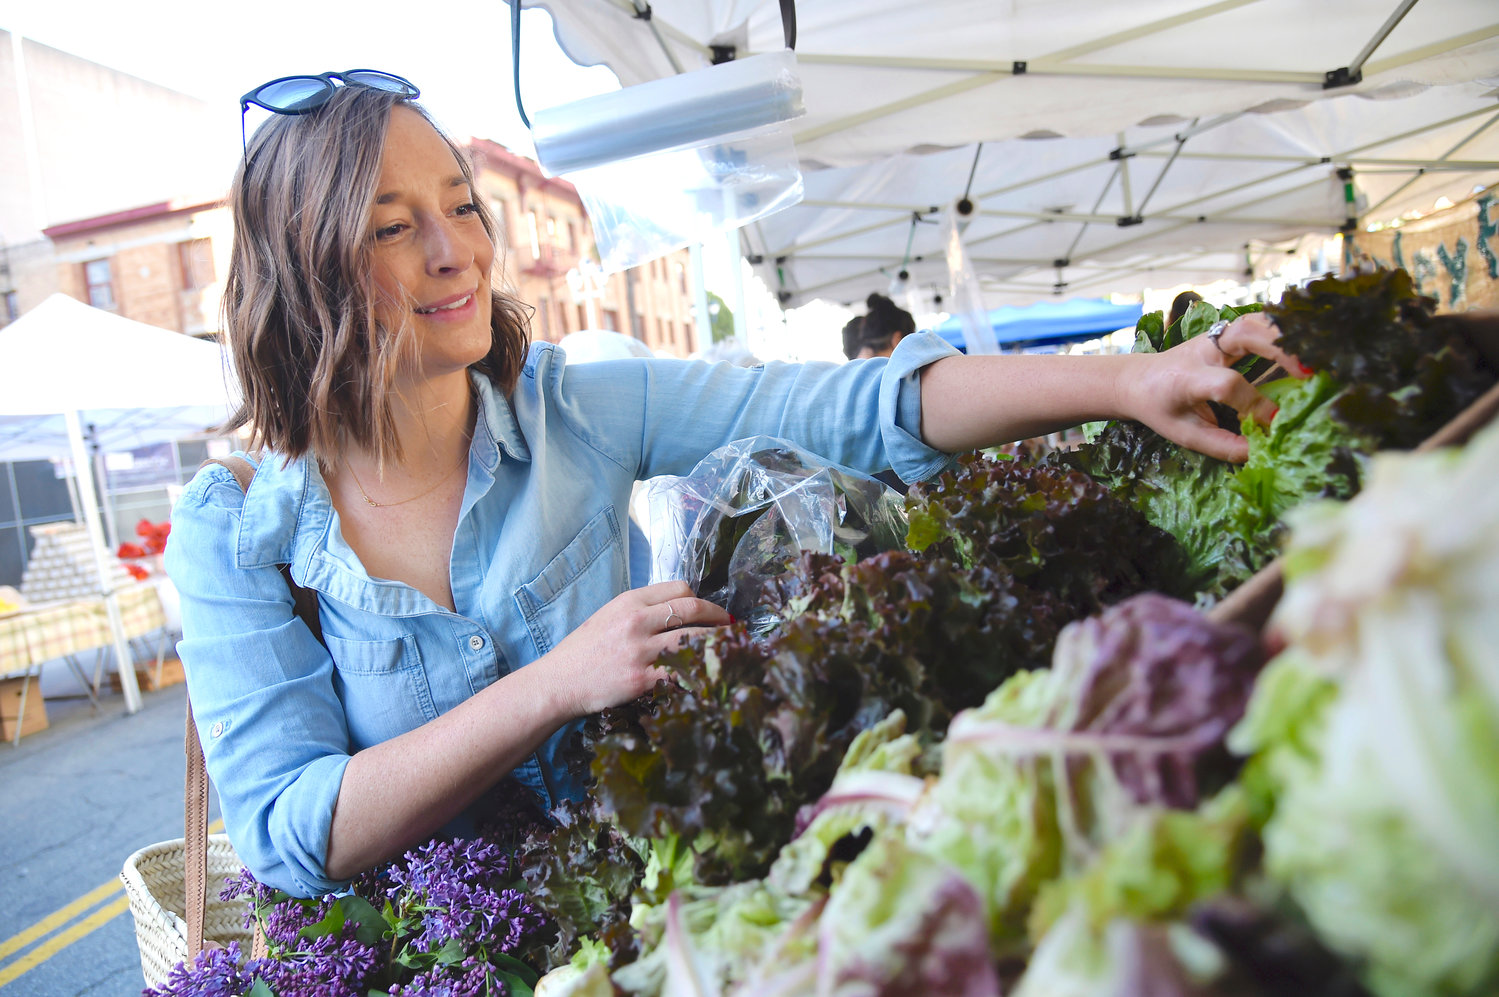 GO GREENS — Food writer Gaby Dalkin peruses Little Gem Lettuce at Santa Monica Downtown Farmers Market, in April 2019, in Santa Monica, California. Salad greens are easy to grow and have tremendous dietary benefits with many vitamins, phytonutrients and fiber.